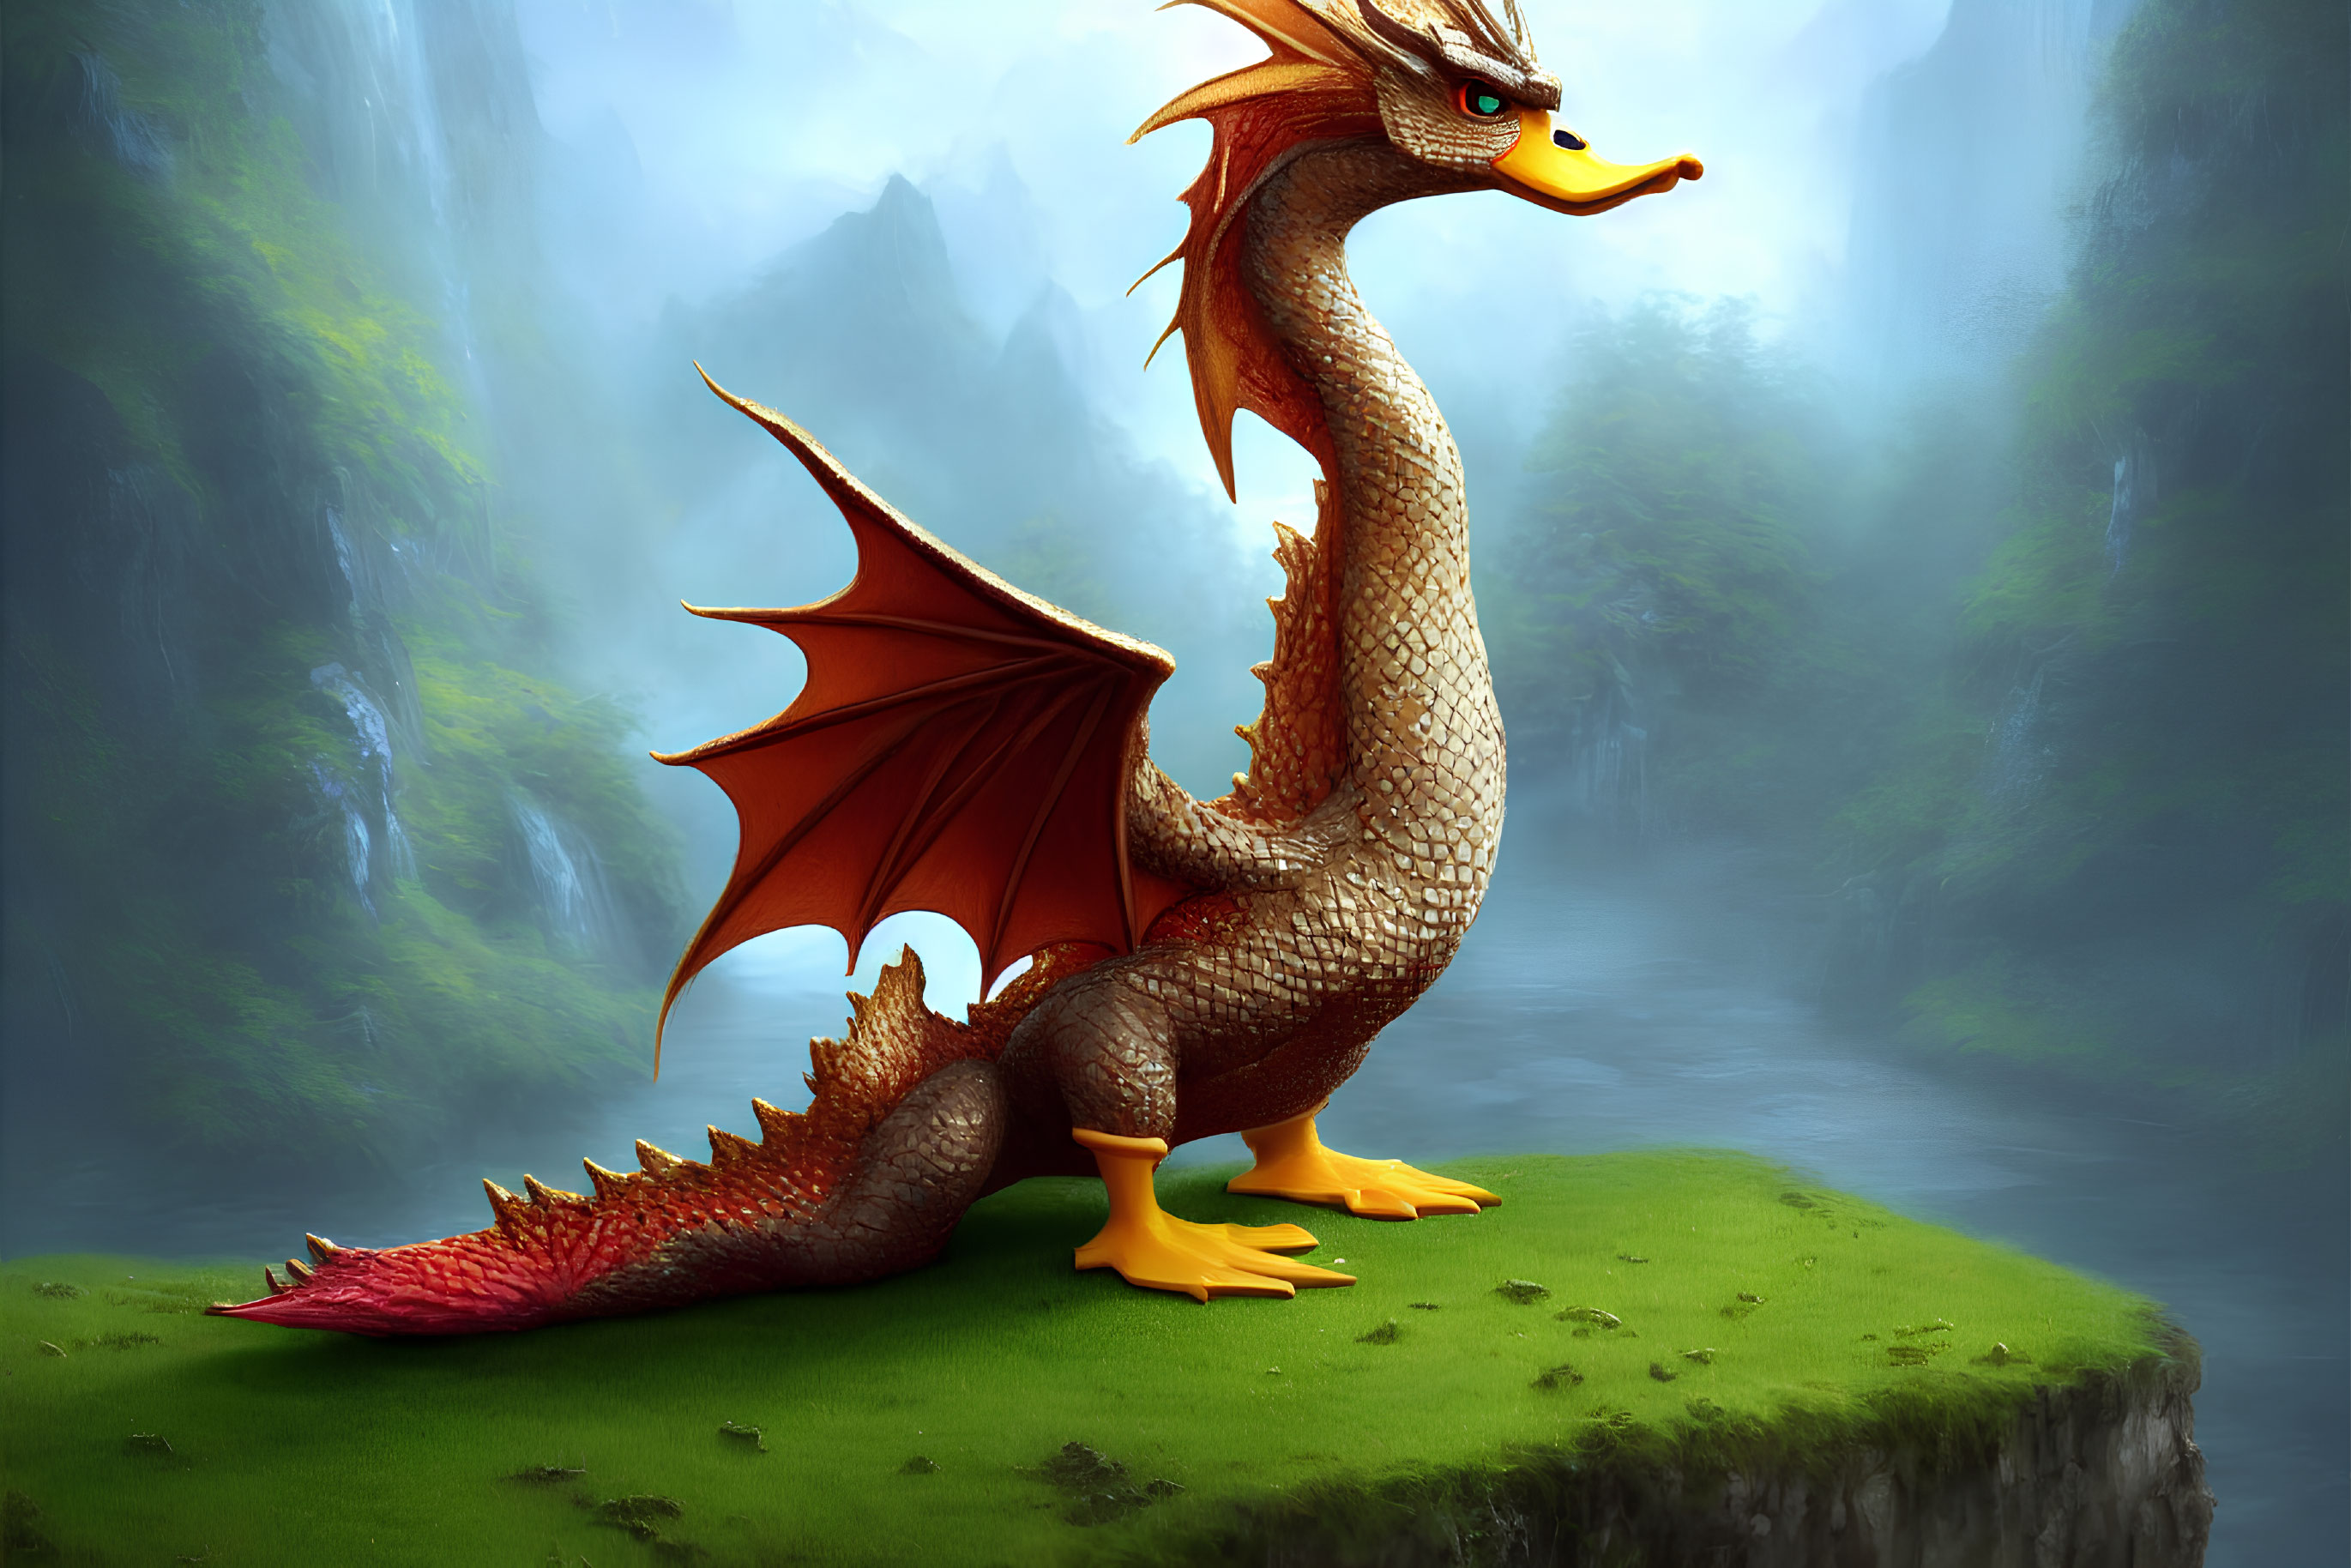 Orange-winged dragon perched on cliff overlooking misty forest waterfall